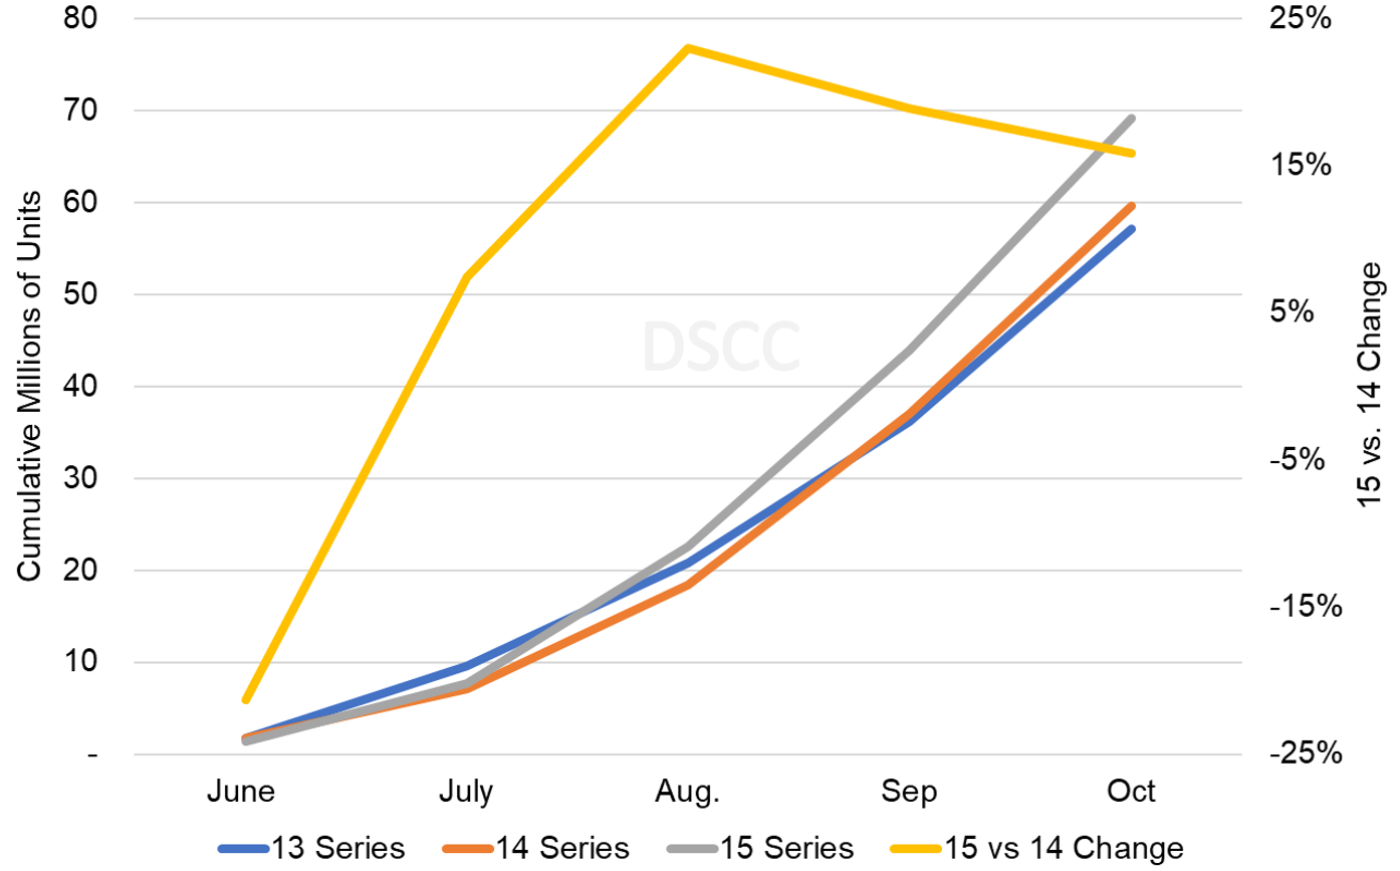 Source: DSCC's Monthly Flagship Smartphone Tracker